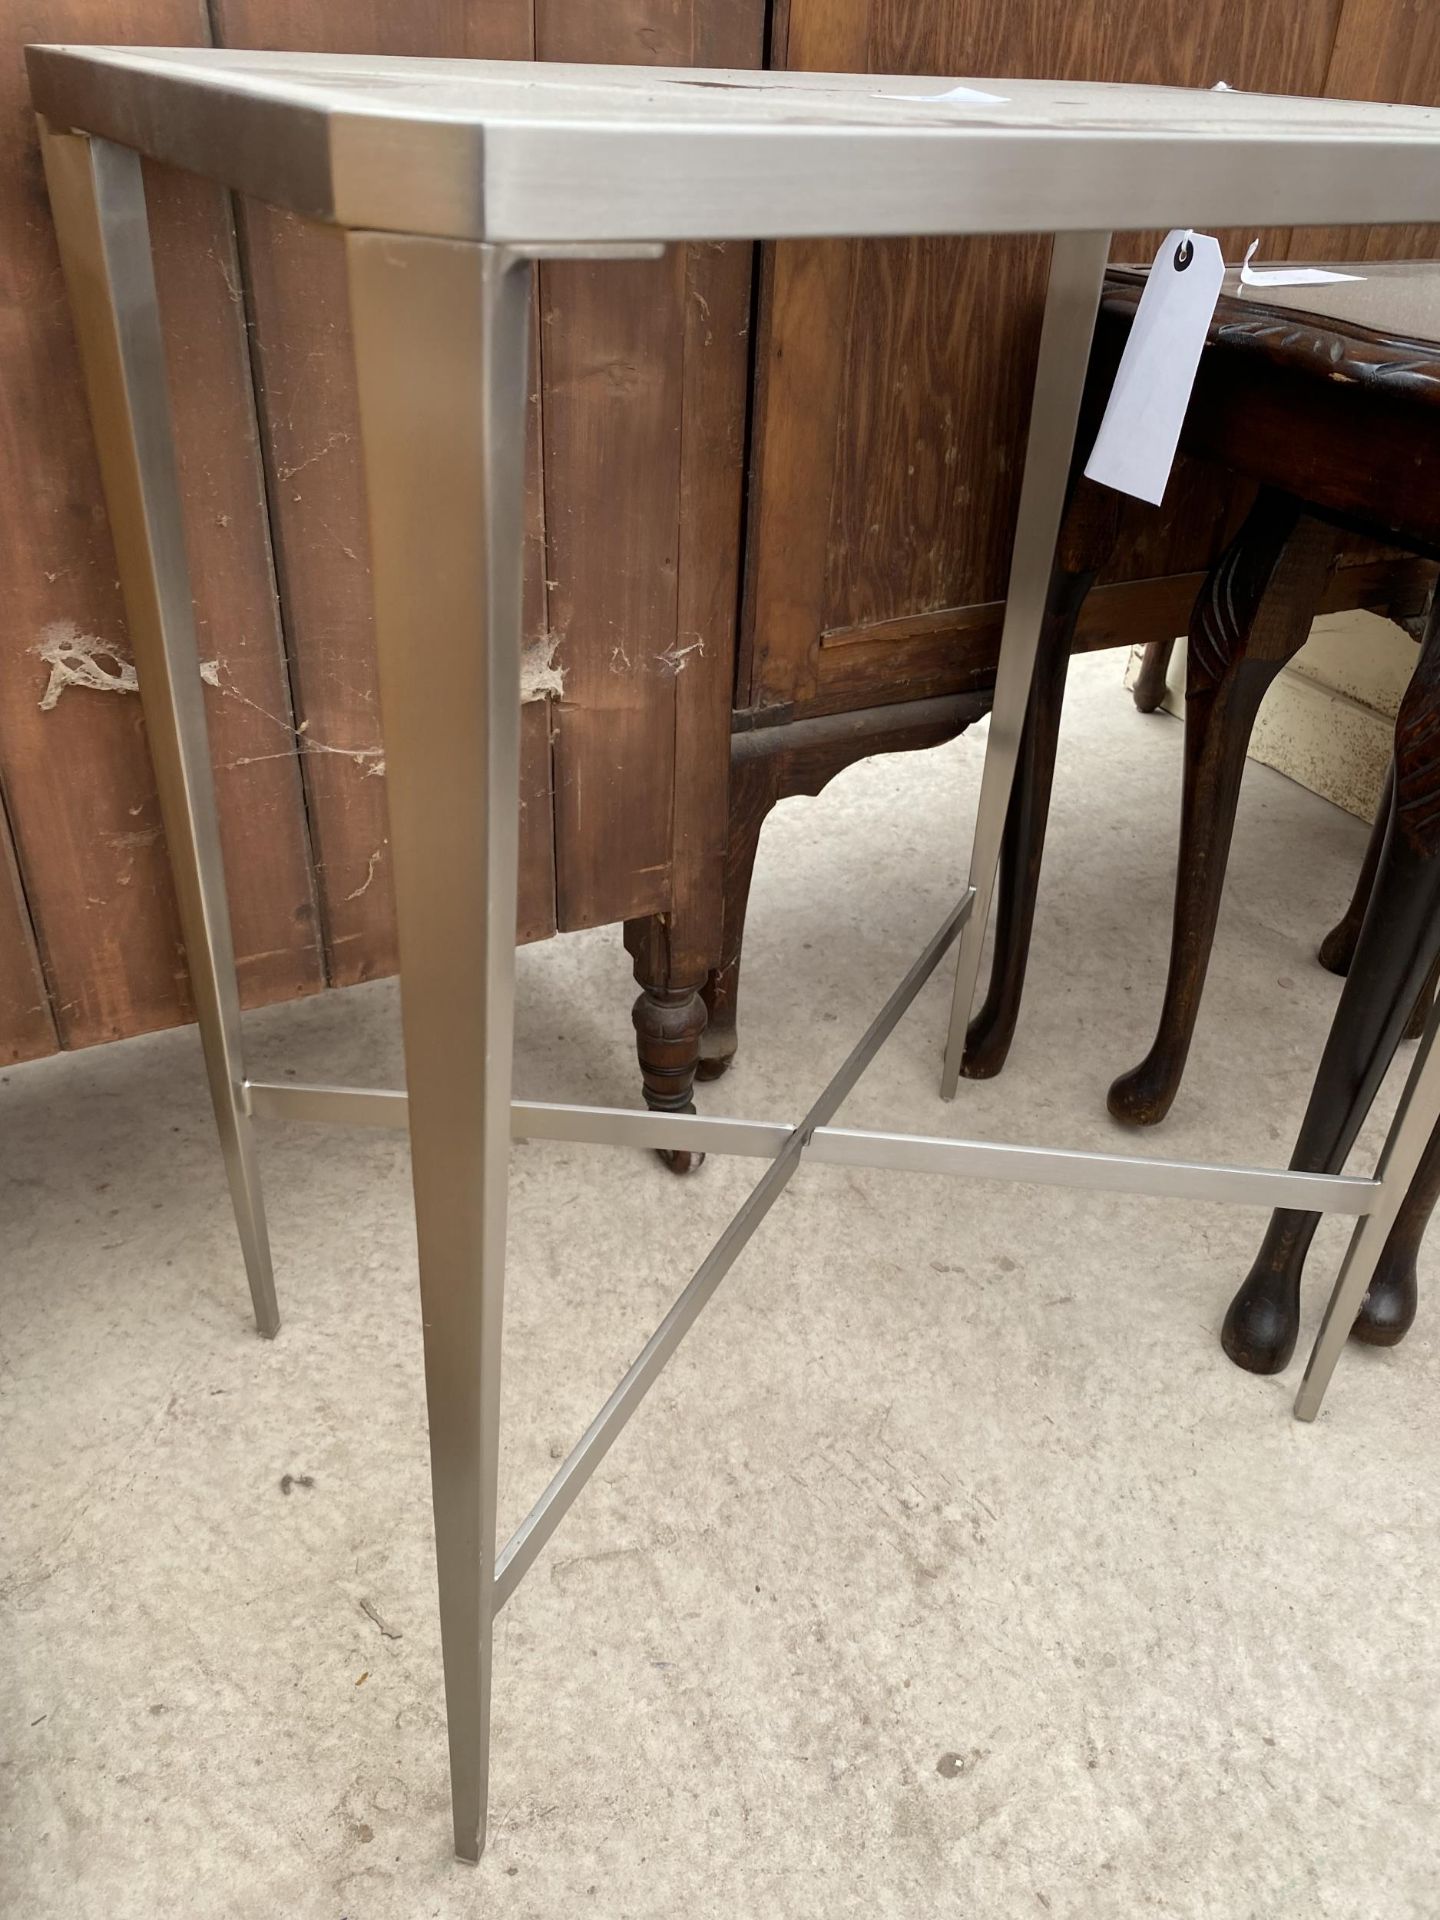 A MODERN POLISHED ALLOY LAMP TABLE WITH CANTED CORNERS, 19.5 X 13.5" - Image 2 of 2